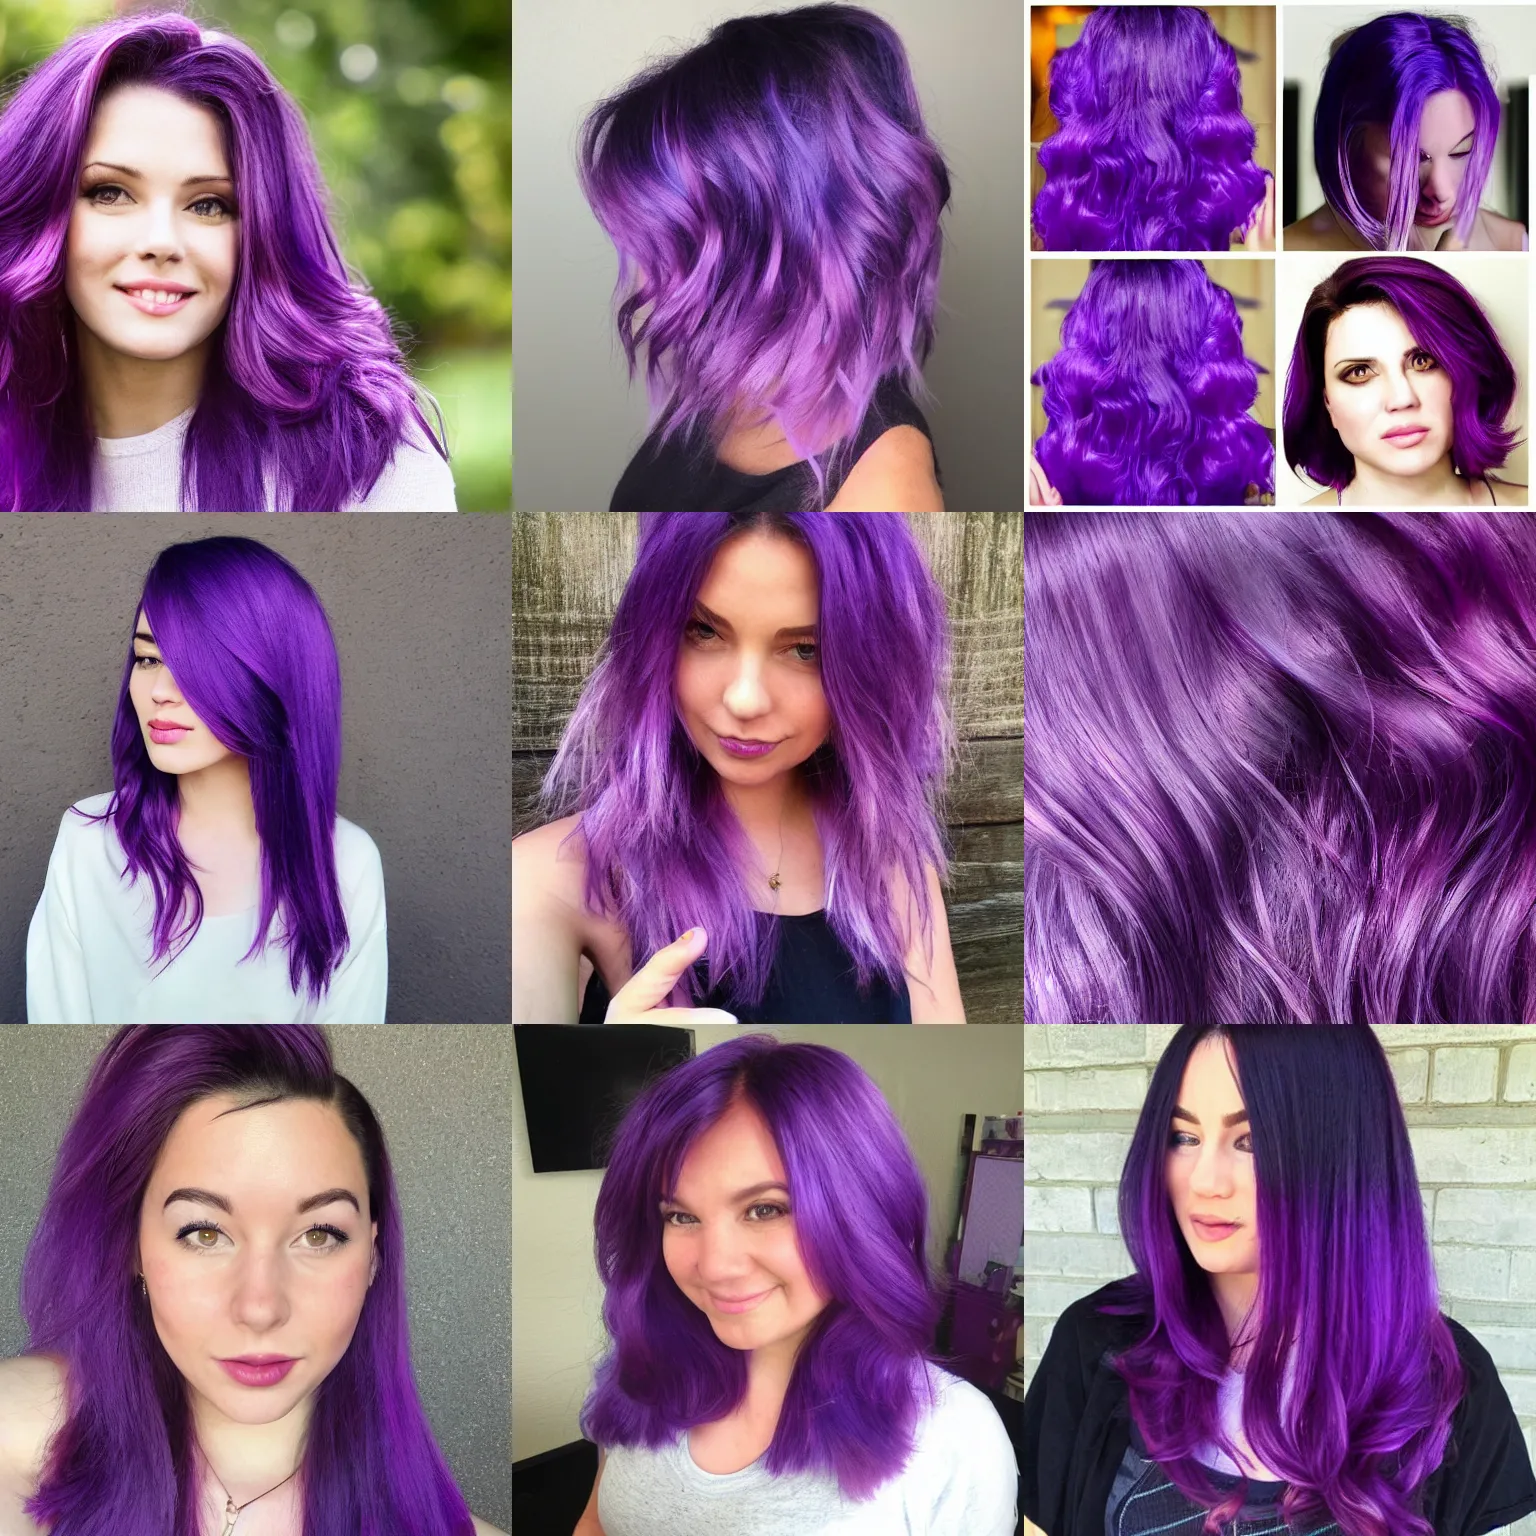 a picture of you with purple hair | Stable Diffusion | OpenArt